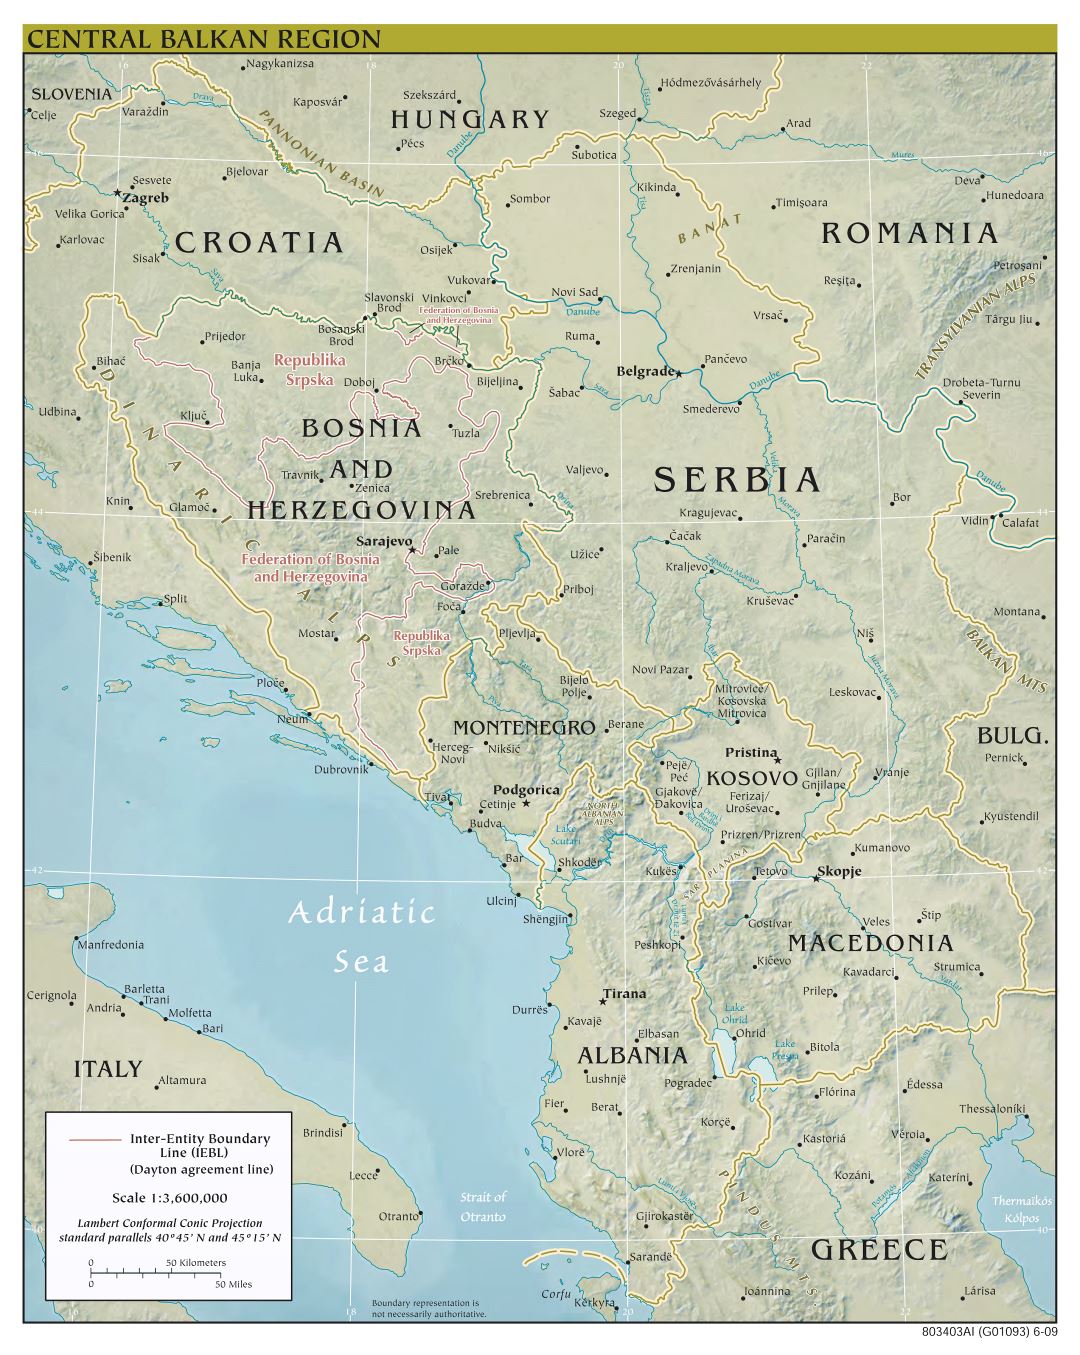 Large scale political map of Central Balkan Region with relief, major roads and major cities - 2009